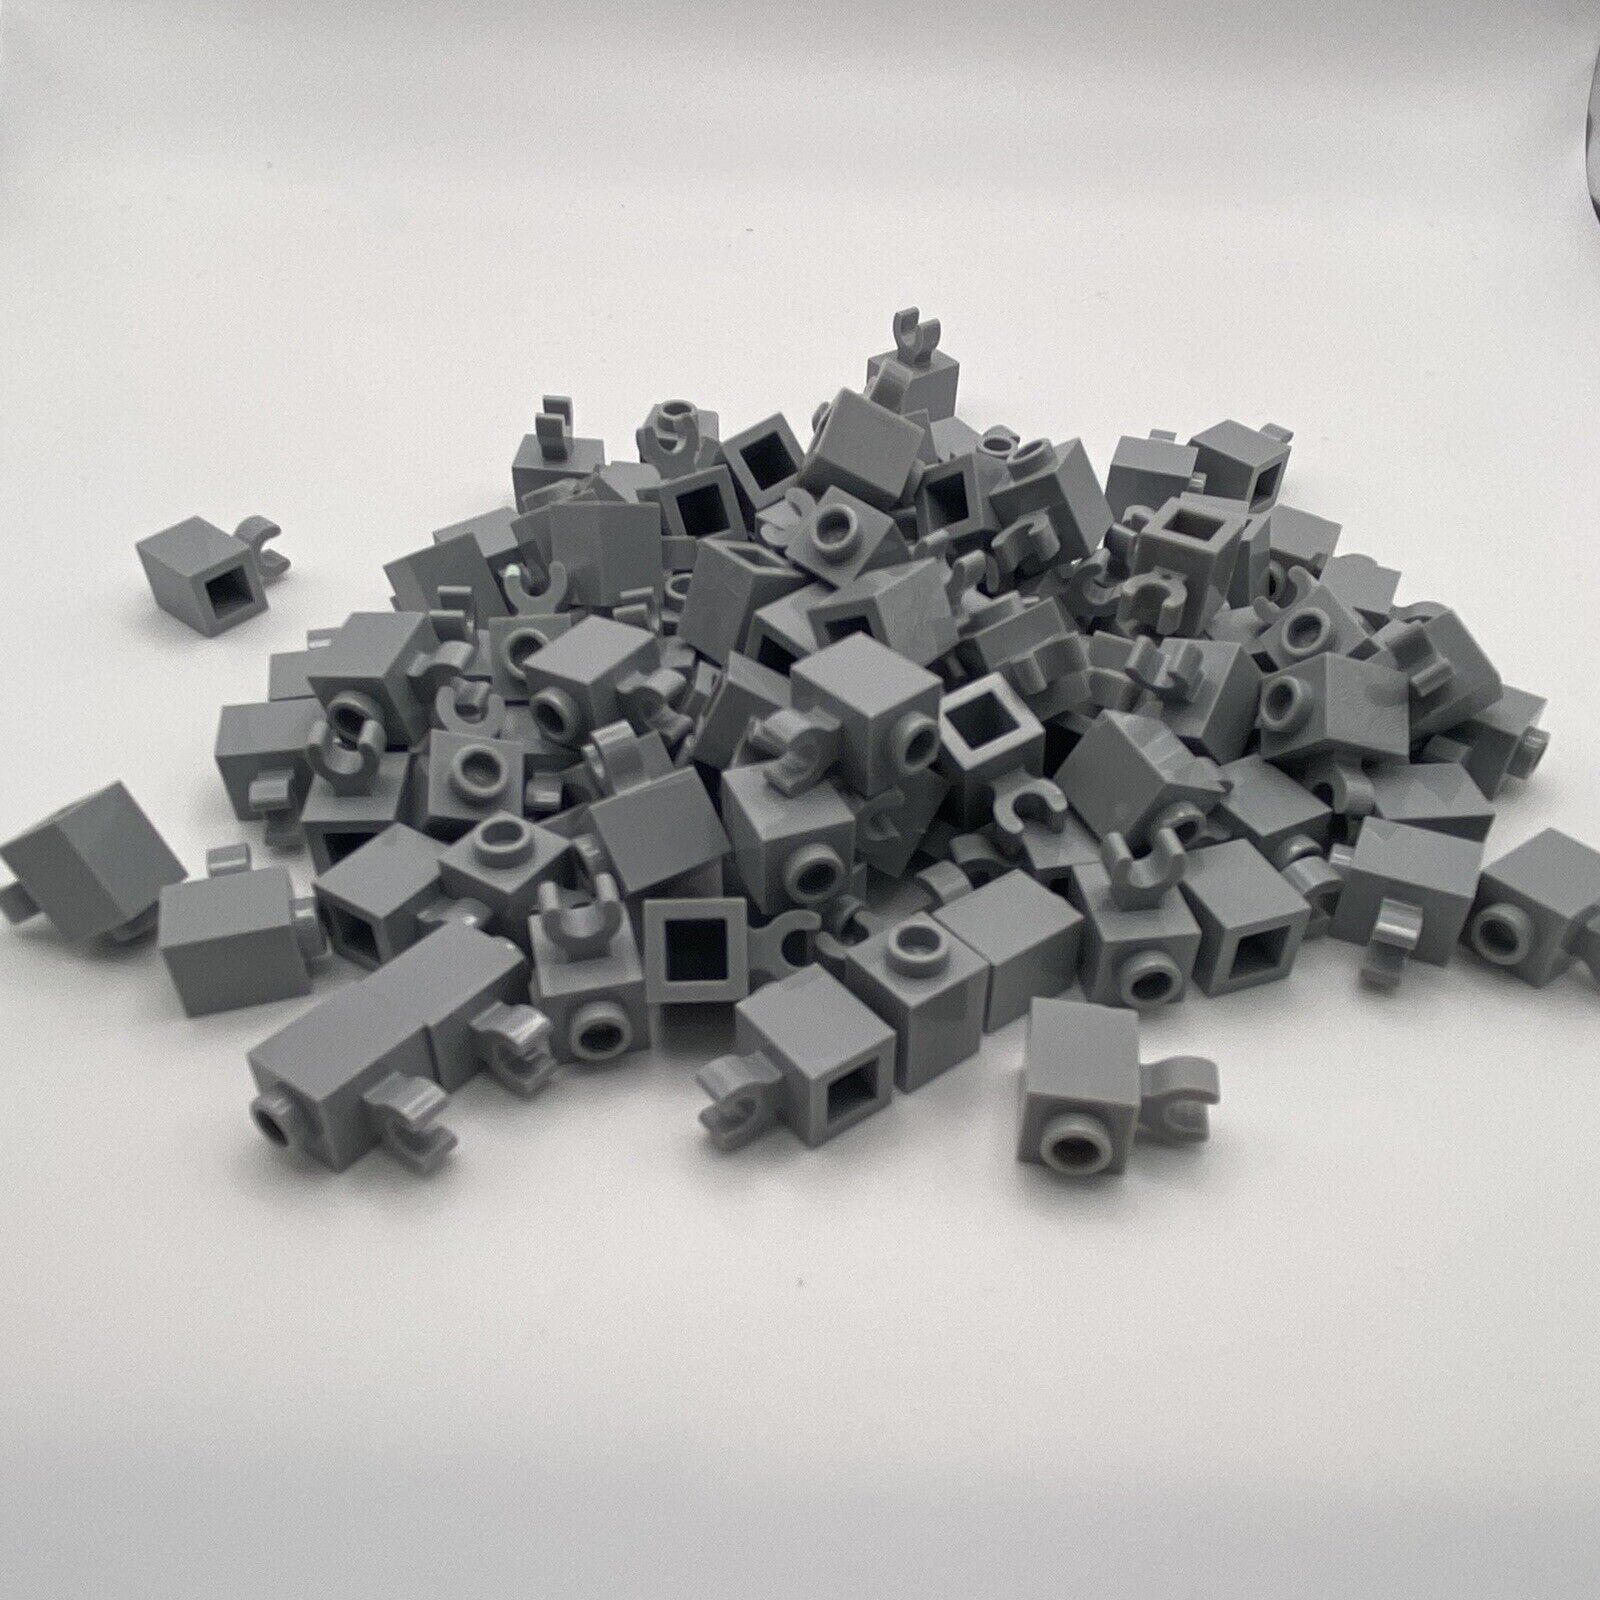 Lego 65460 - Lot of 100 Pieces in Med. Stone Grey - Brick 1x1 w/Holder - 6345426